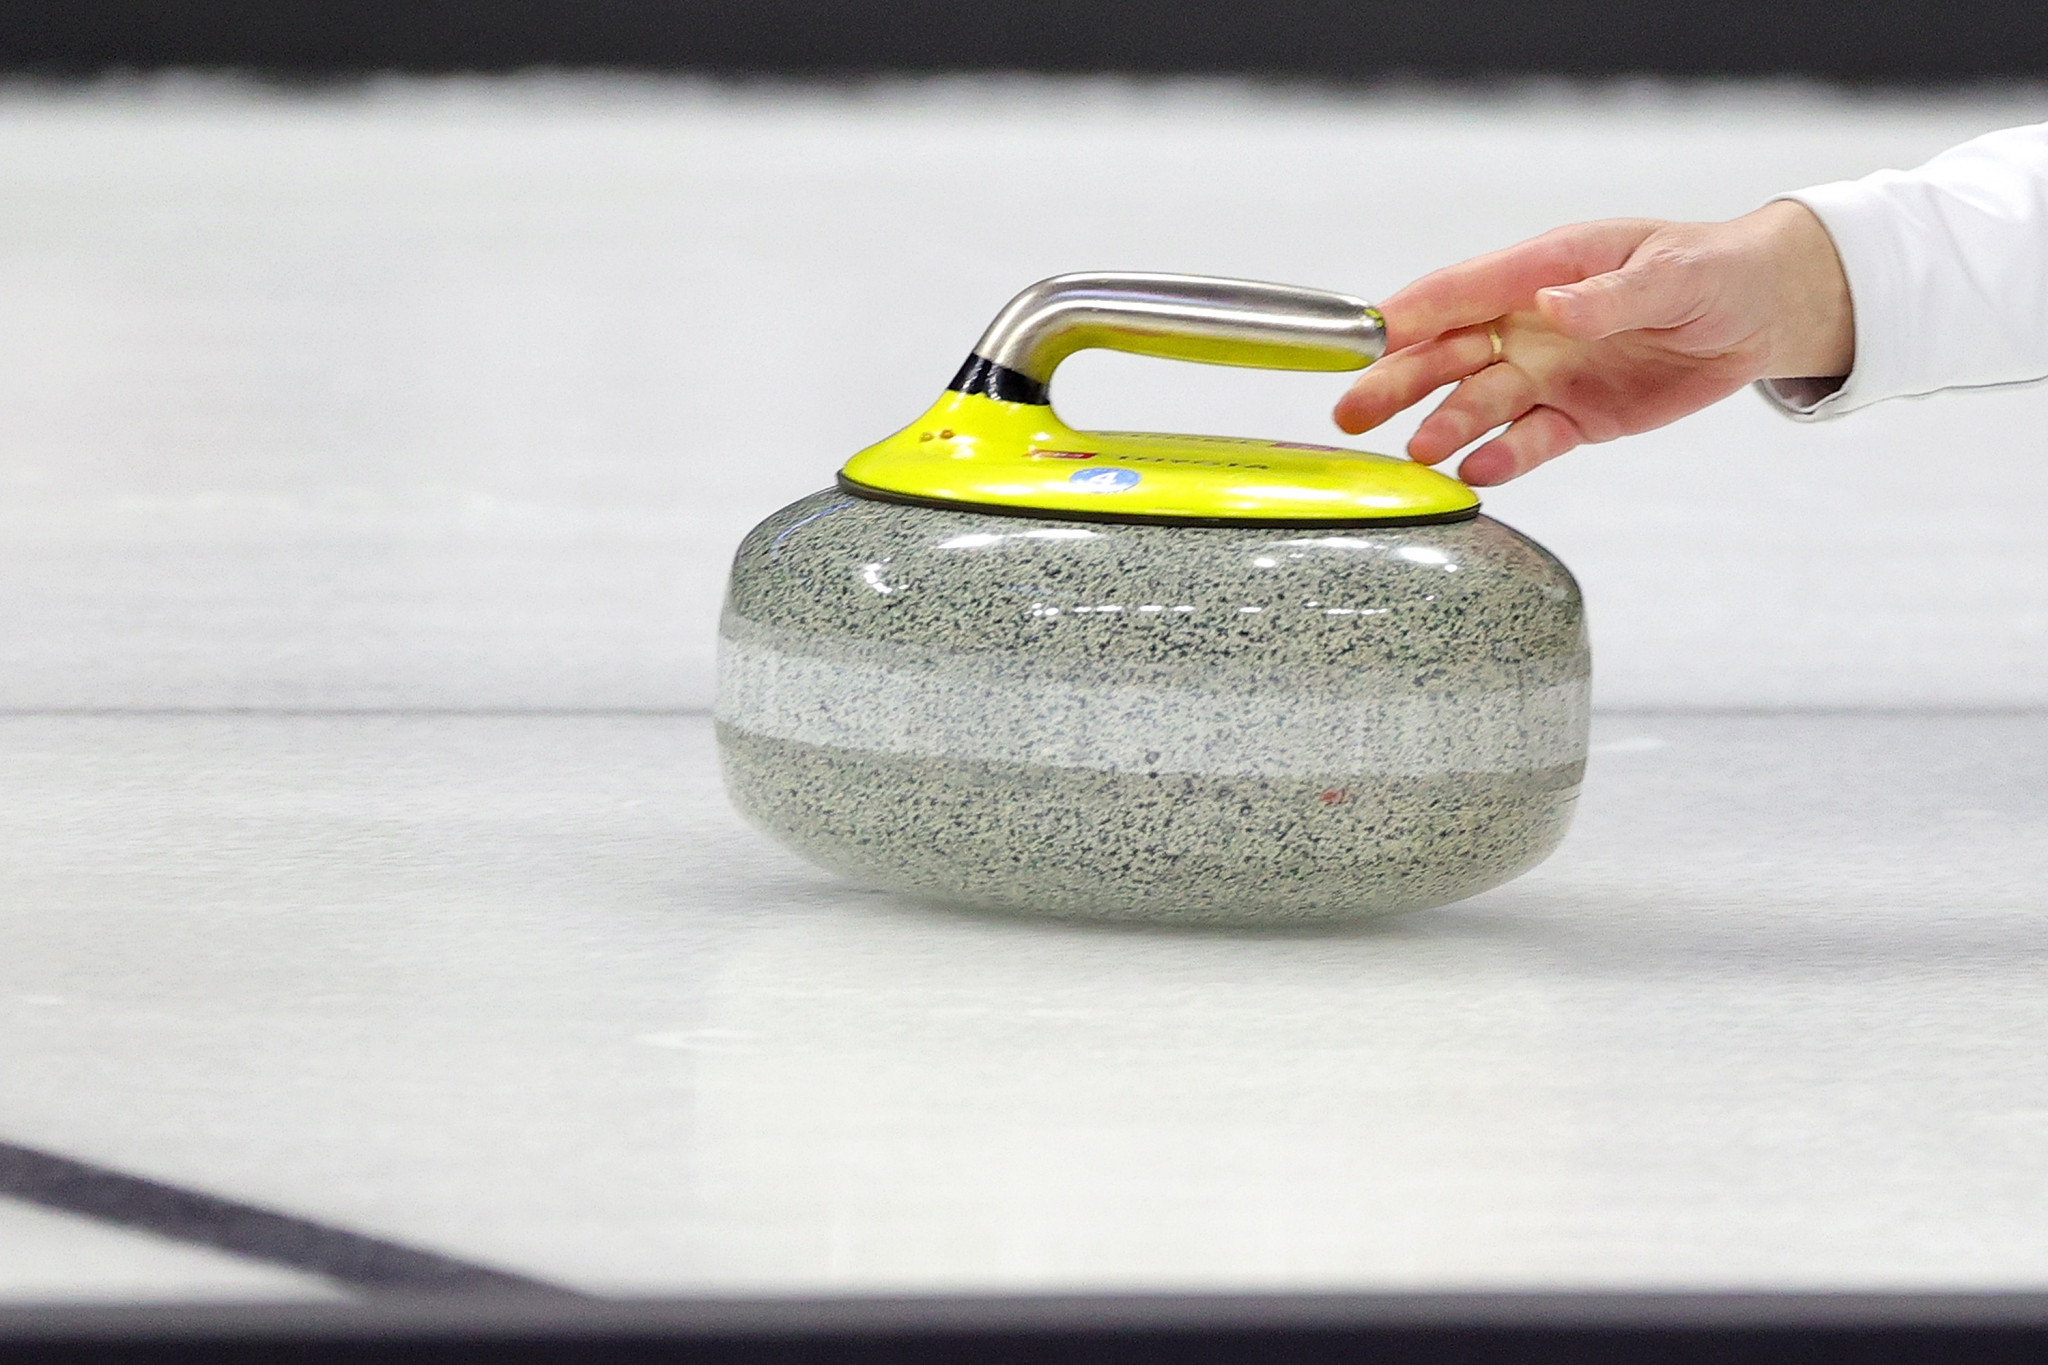 World Curling said a sponsorship issue had impacted broadcast of the Olympic Qualification Event in the Netherlands ©Getty Images